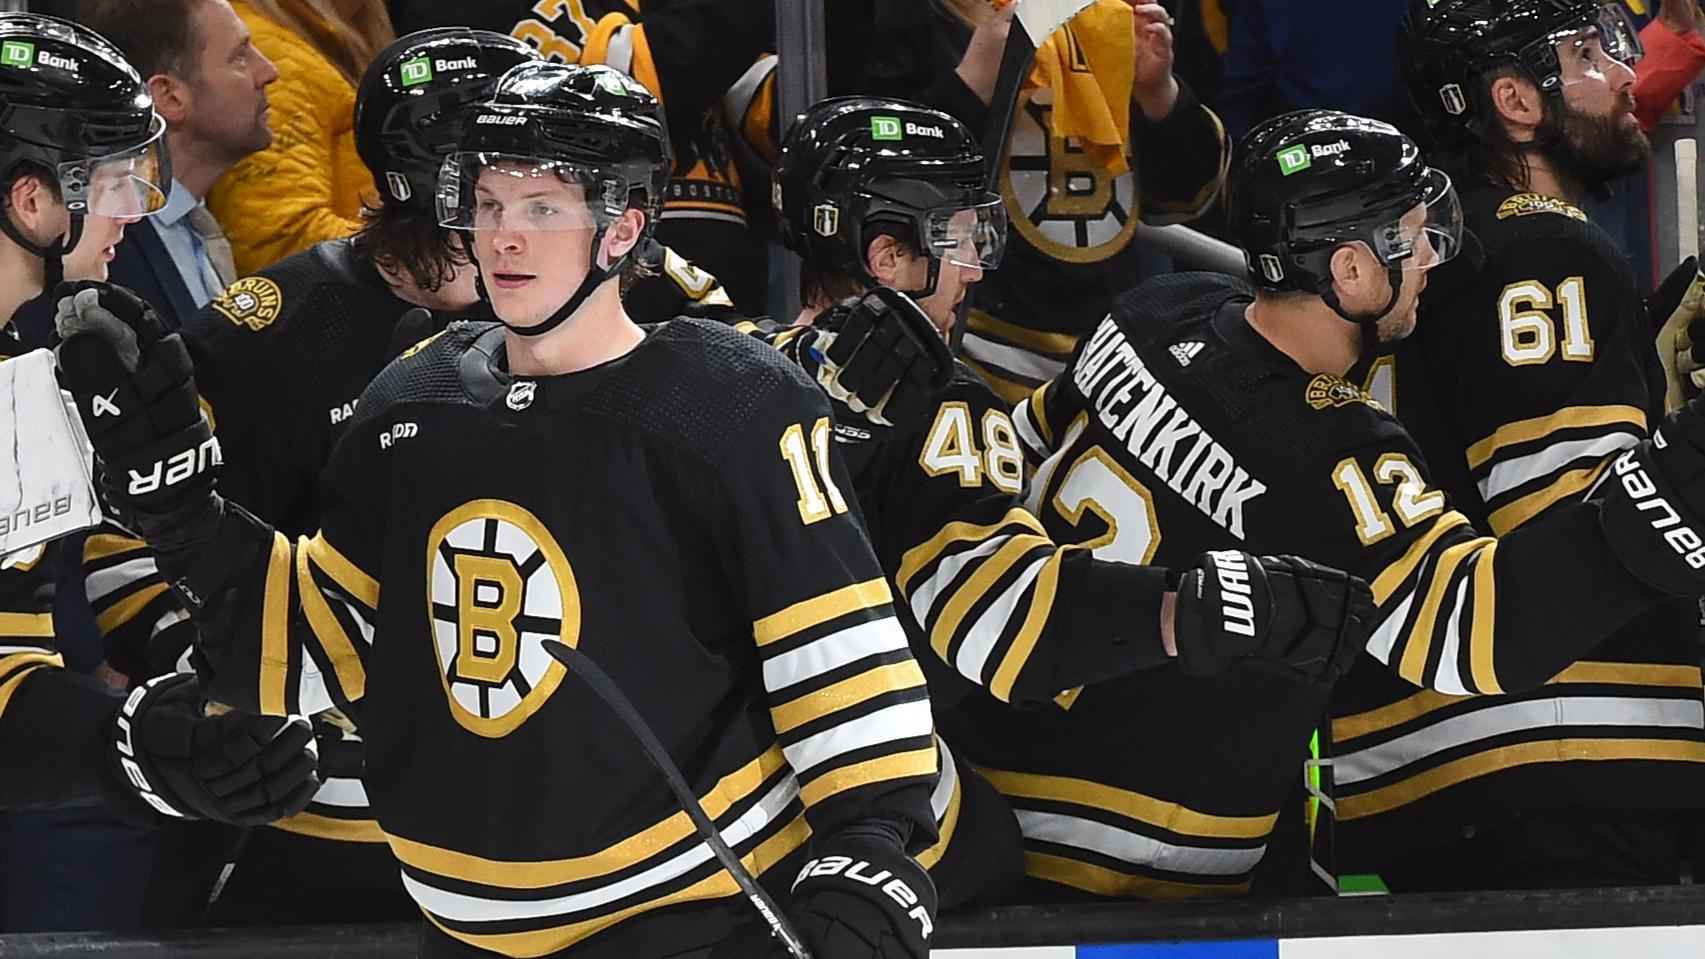 Trent Frederic seals game with empty-net score for Bruins